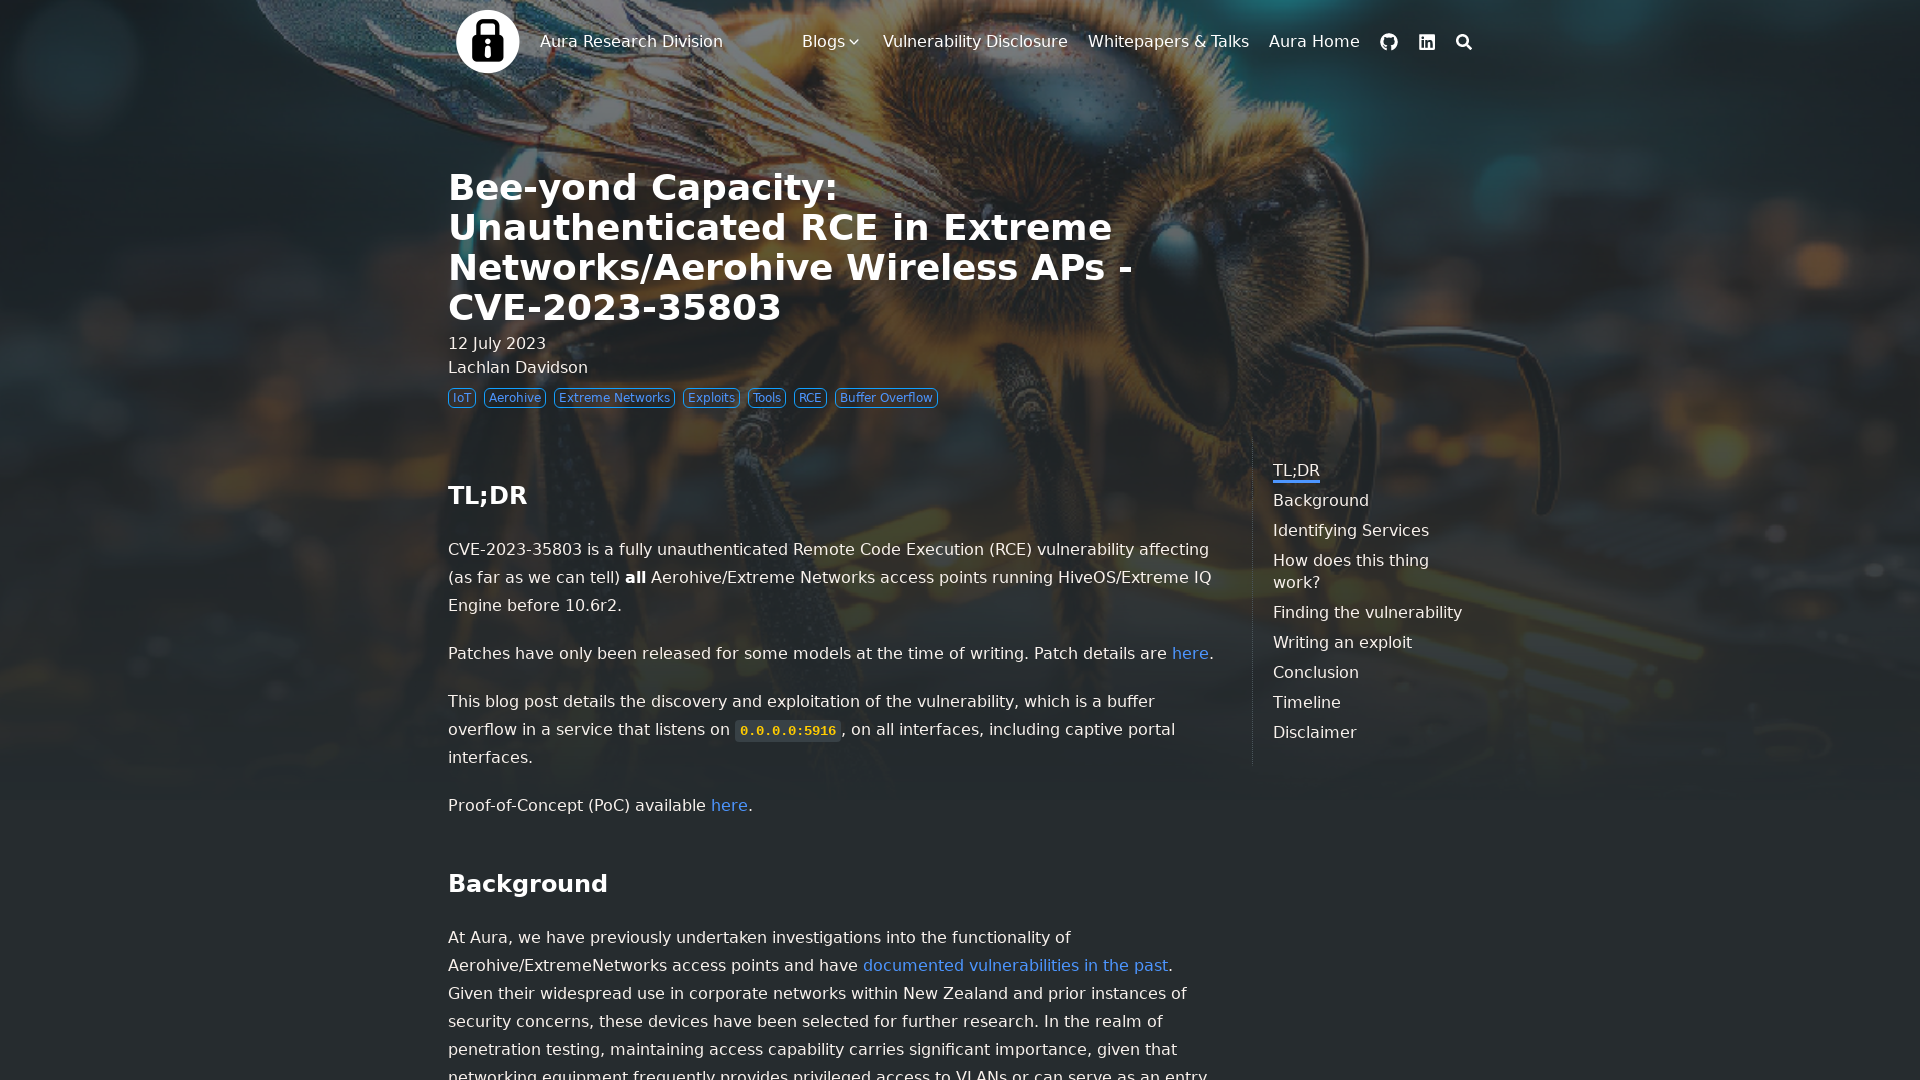 Bee-yond Capacity: Unauthenticated RCE in Extreme Networks/Aerohive Wireless APs - CVE-2023-35803 · Aura Research Division